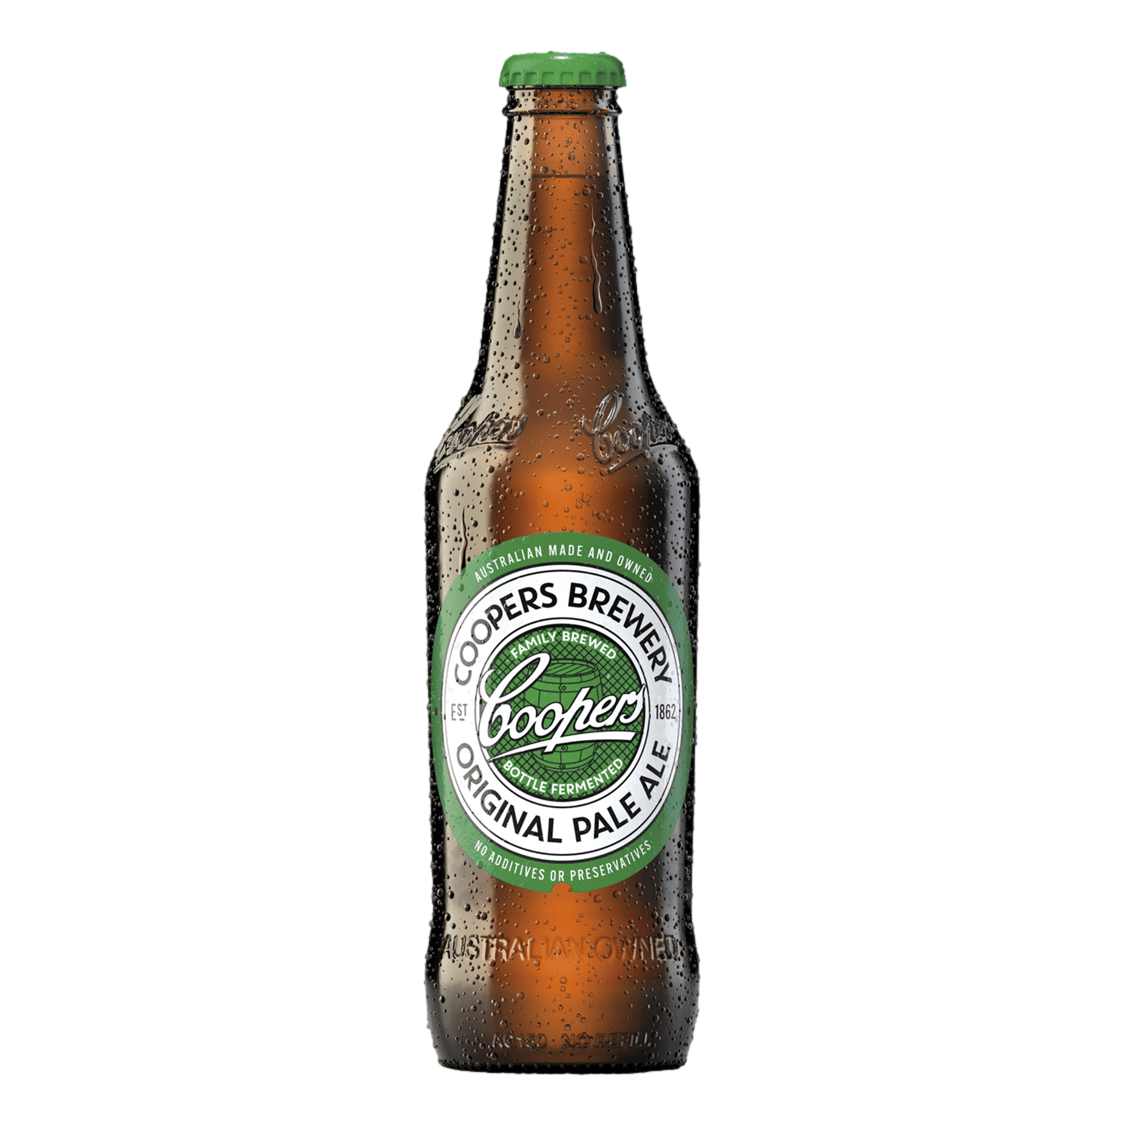 Coopers Pale Ale 375ml Bottle Case of 24